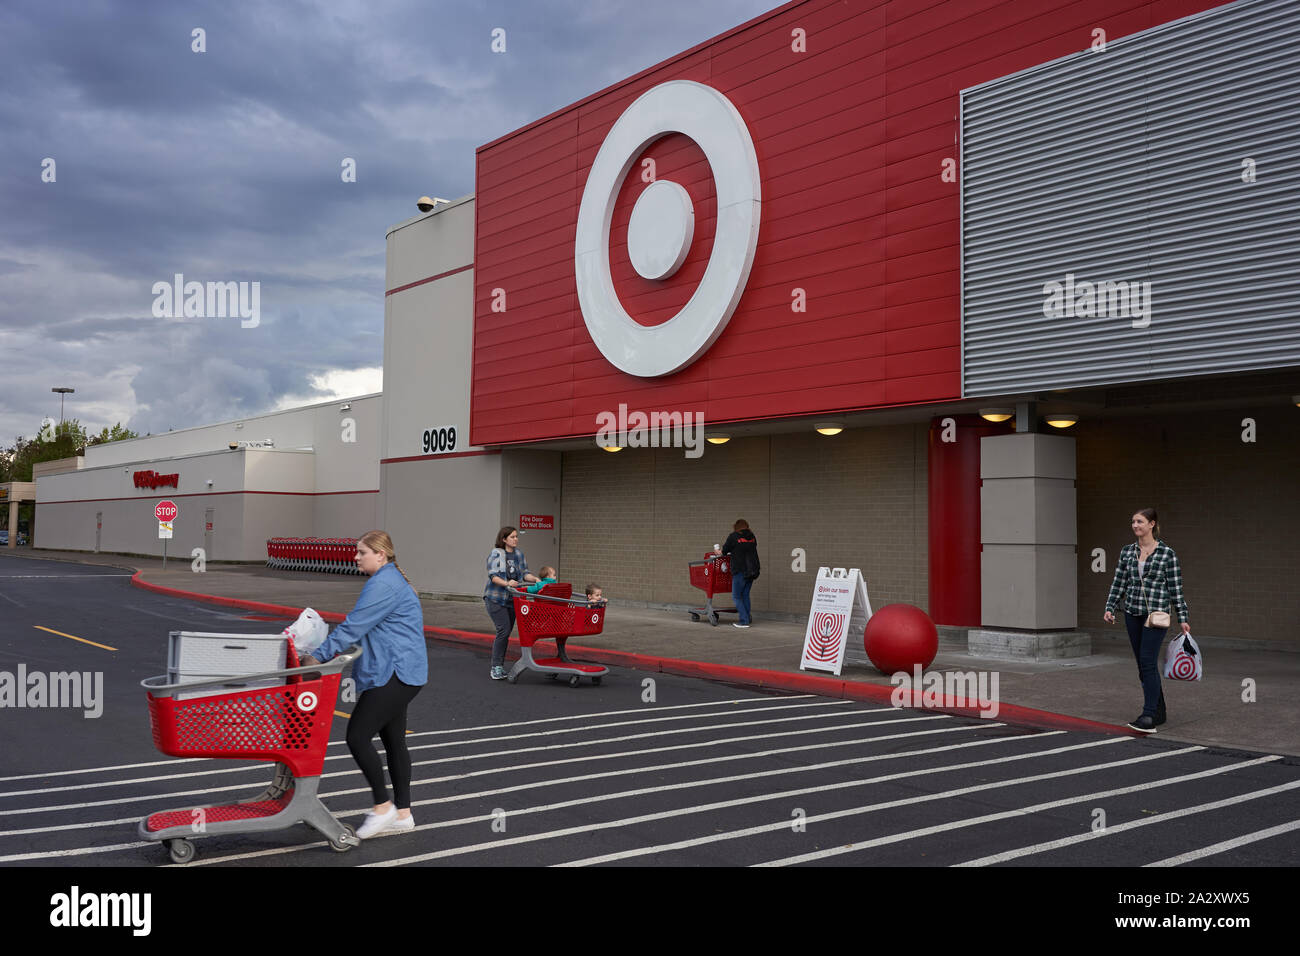 Customers outside a Target Store in Tigard, Oregon, seen on Wednesday, Sep 18, 2019. Stock Photo